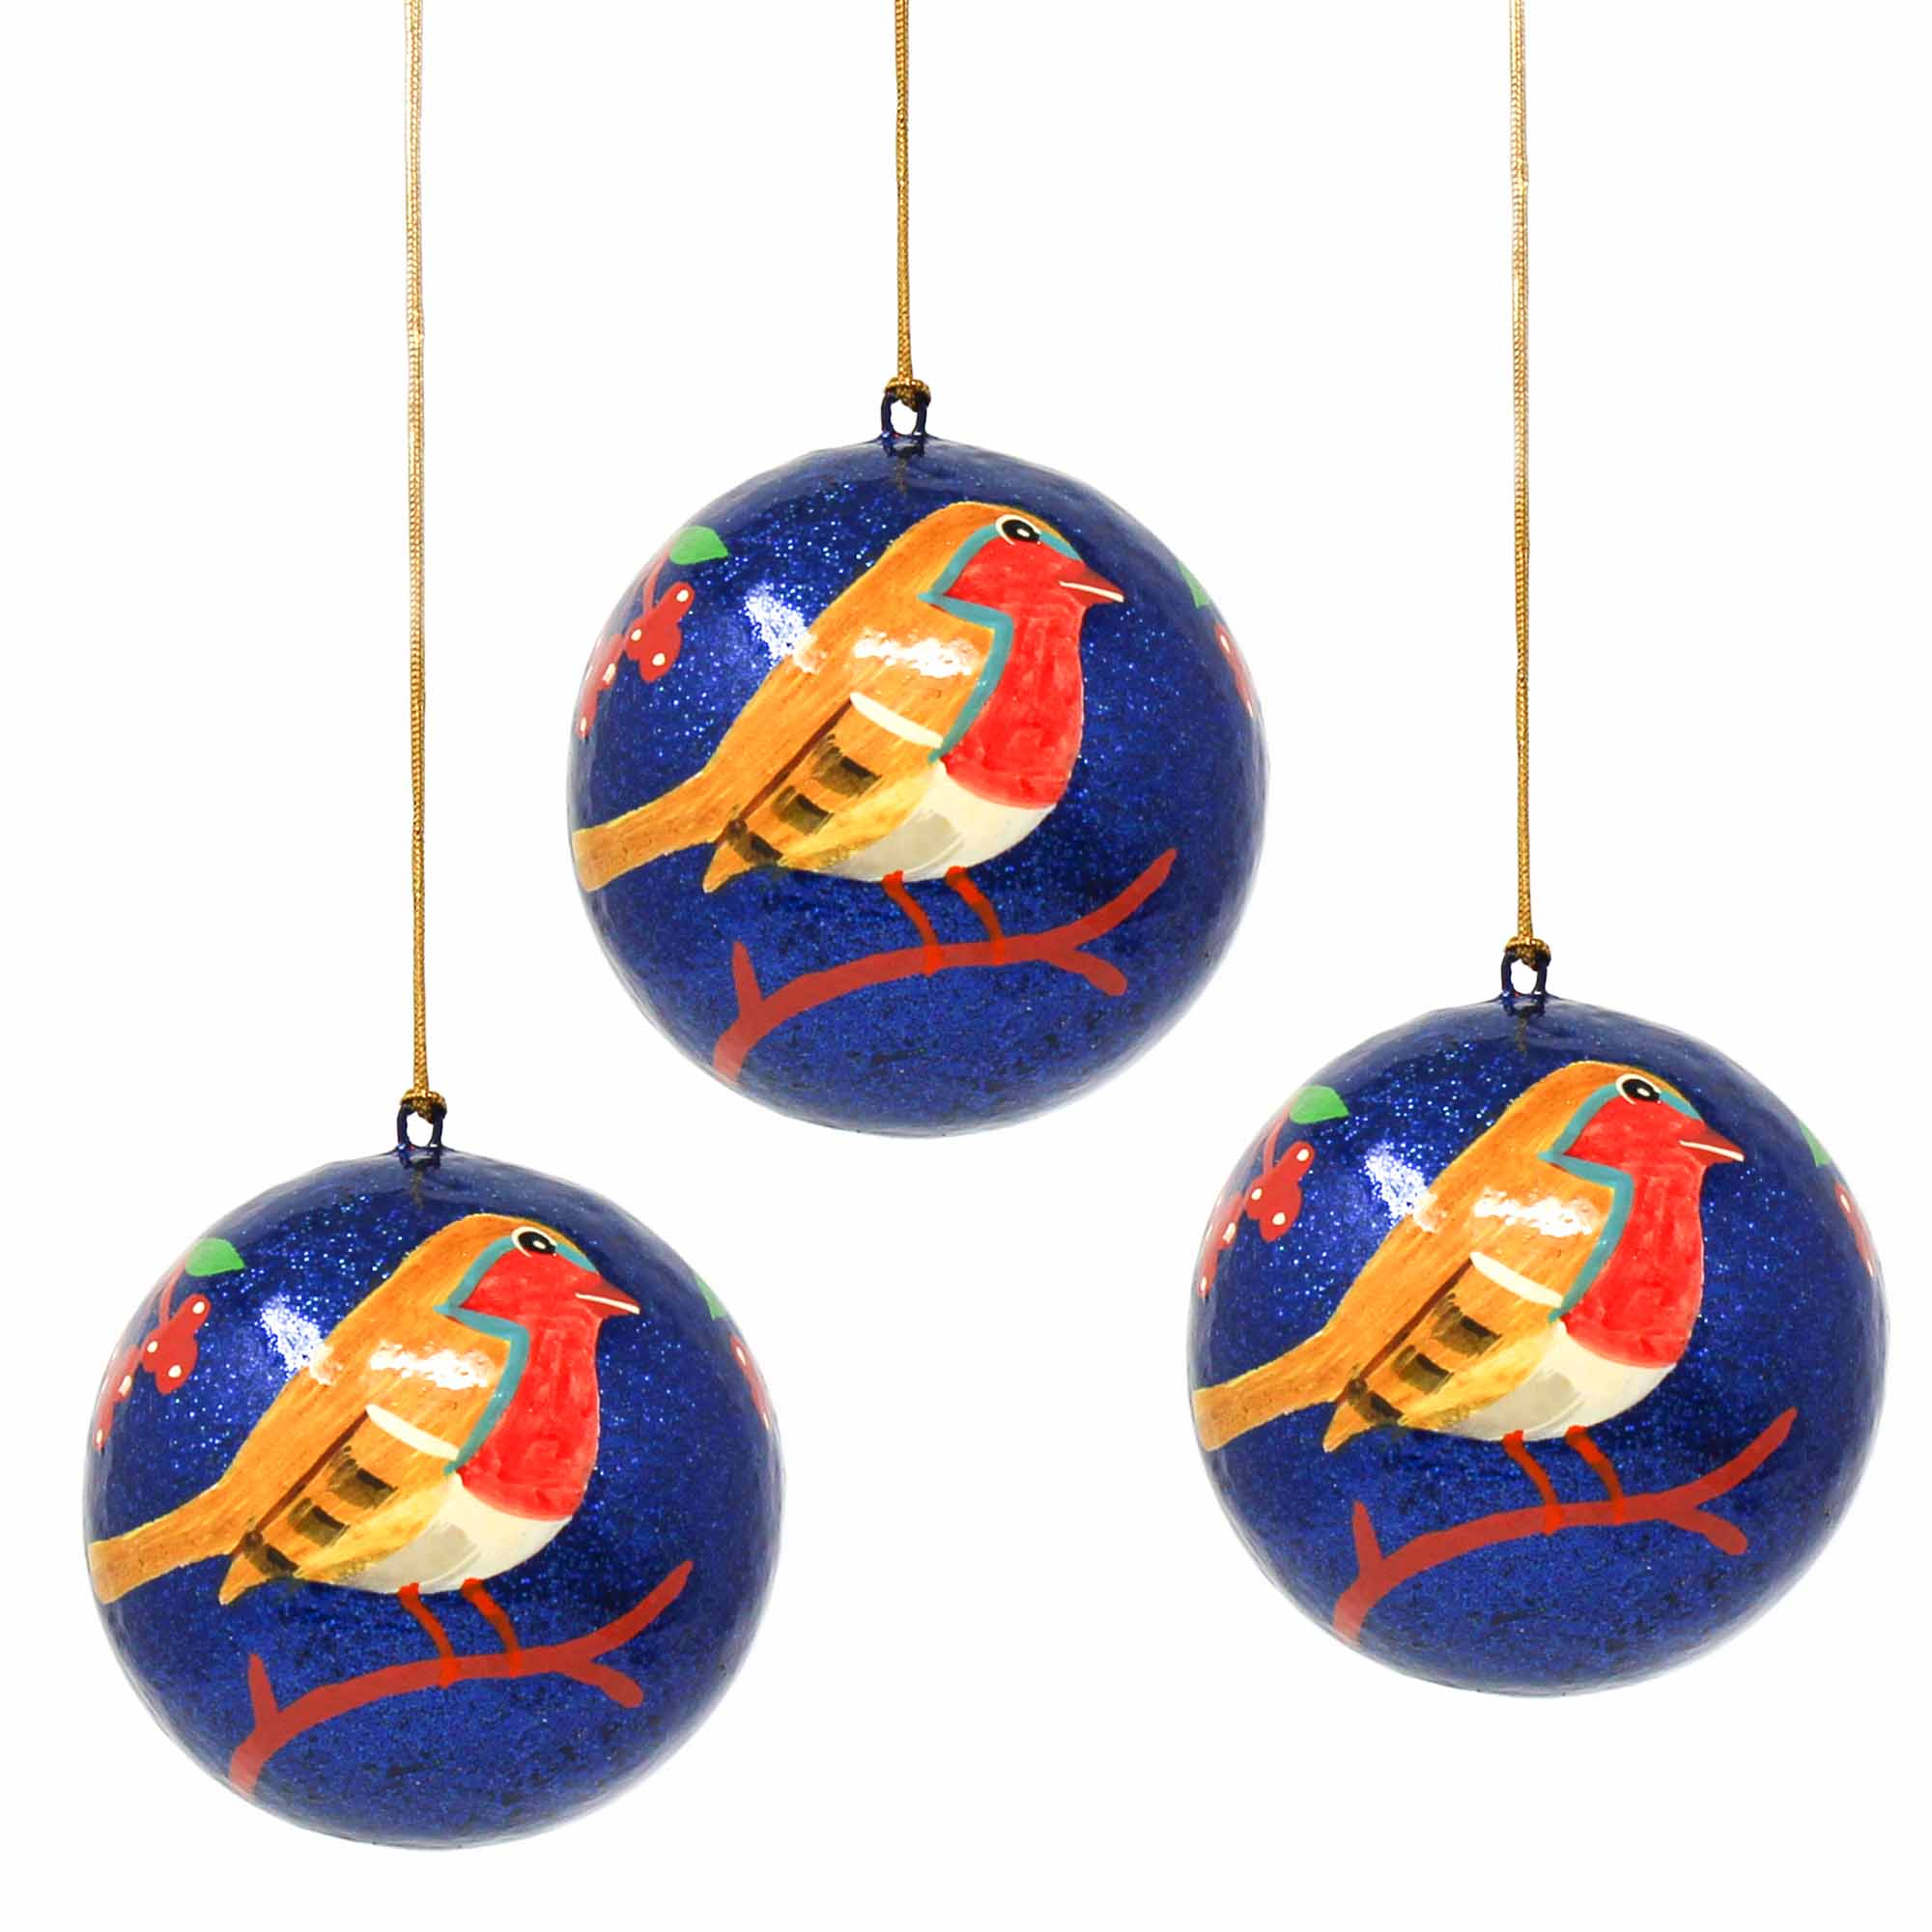 Handpainted Ornament Bird on Branch - Pack of 3